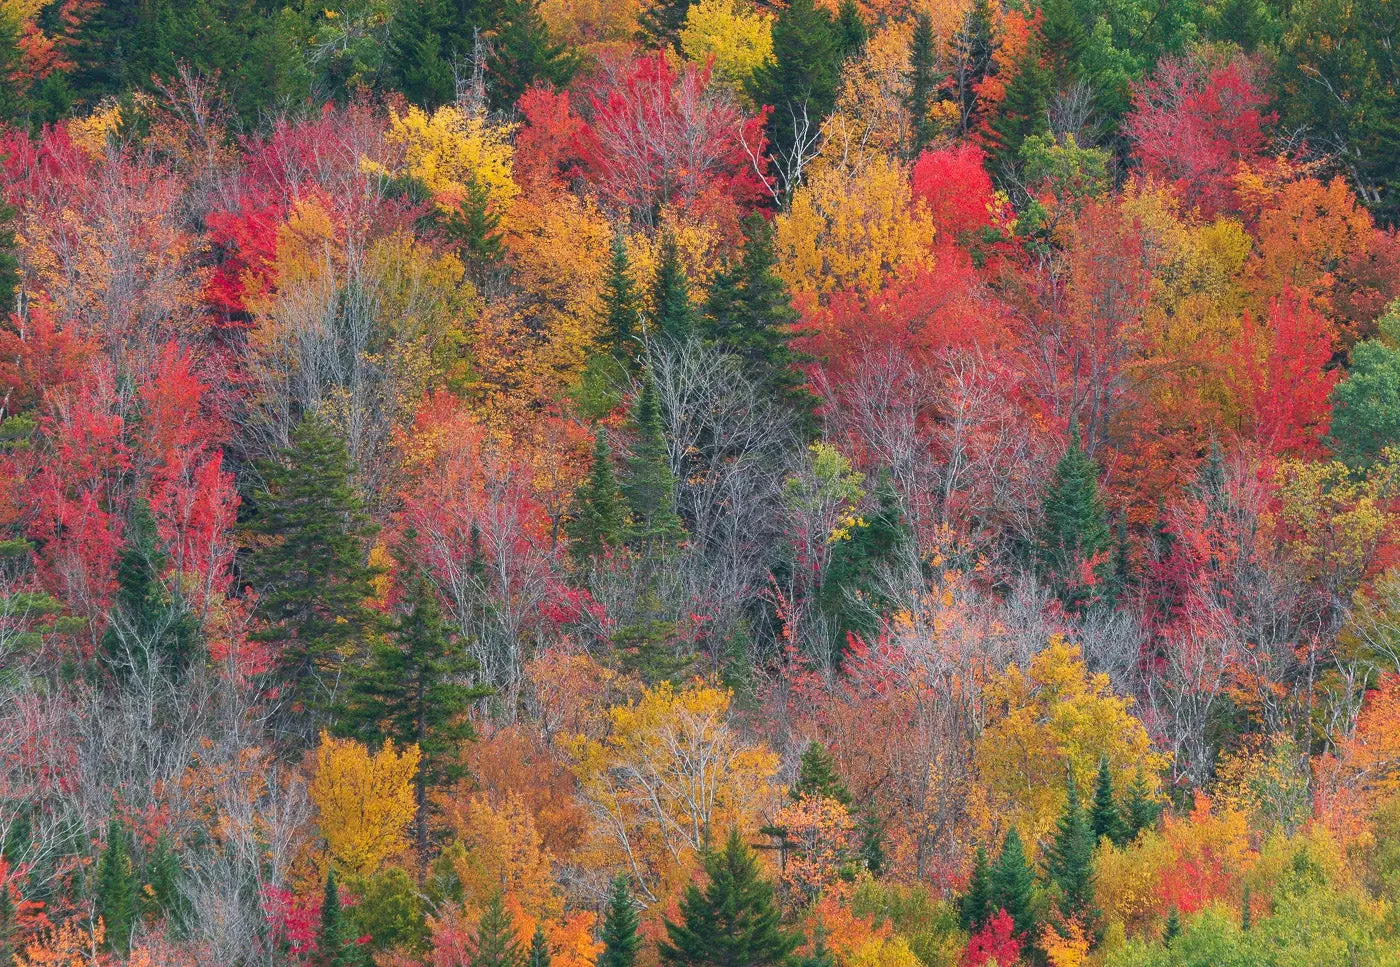 Photo of a group of trees showing all different shades of fall colors.